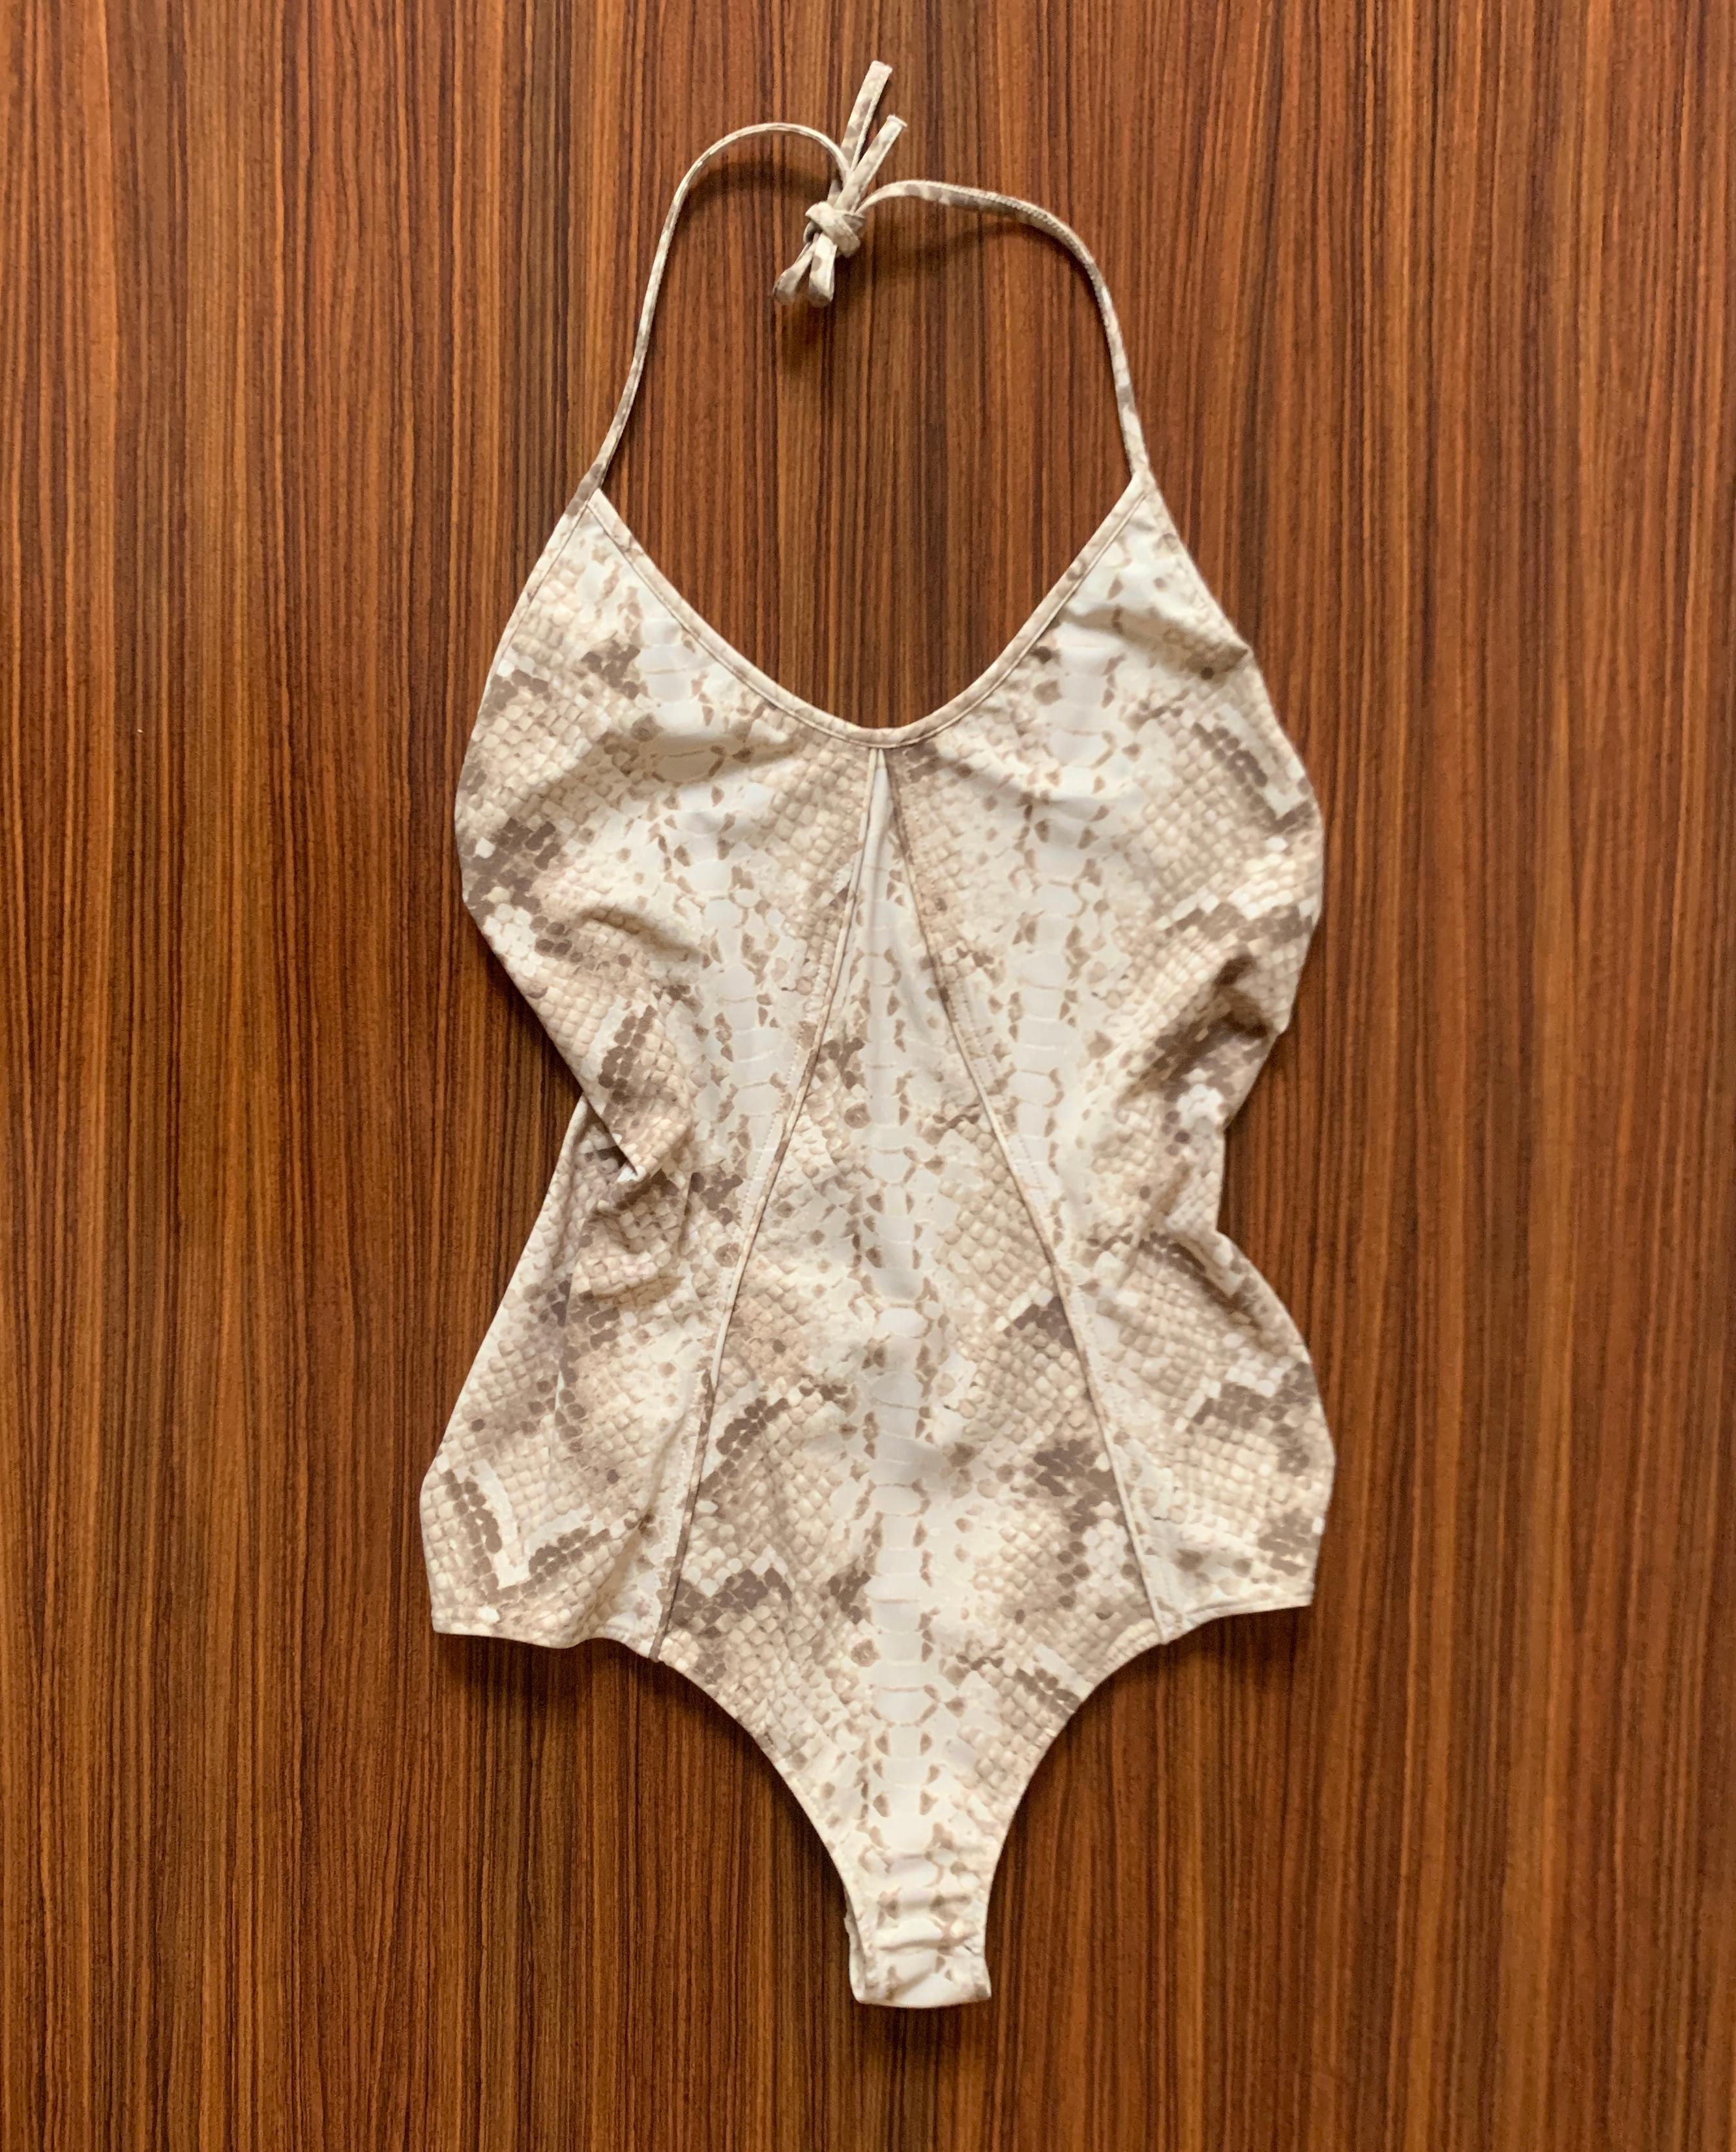 Yves Saint Laurent tan and grey reptile print backless swimsuit with halter top. Seam detail at front. Tie closure. 

80% nylon, 20% elastane.
Lined in nylon.

Made in Italy.

Size FR 40, approximate US 8.
Lots of stretch, measurements taken